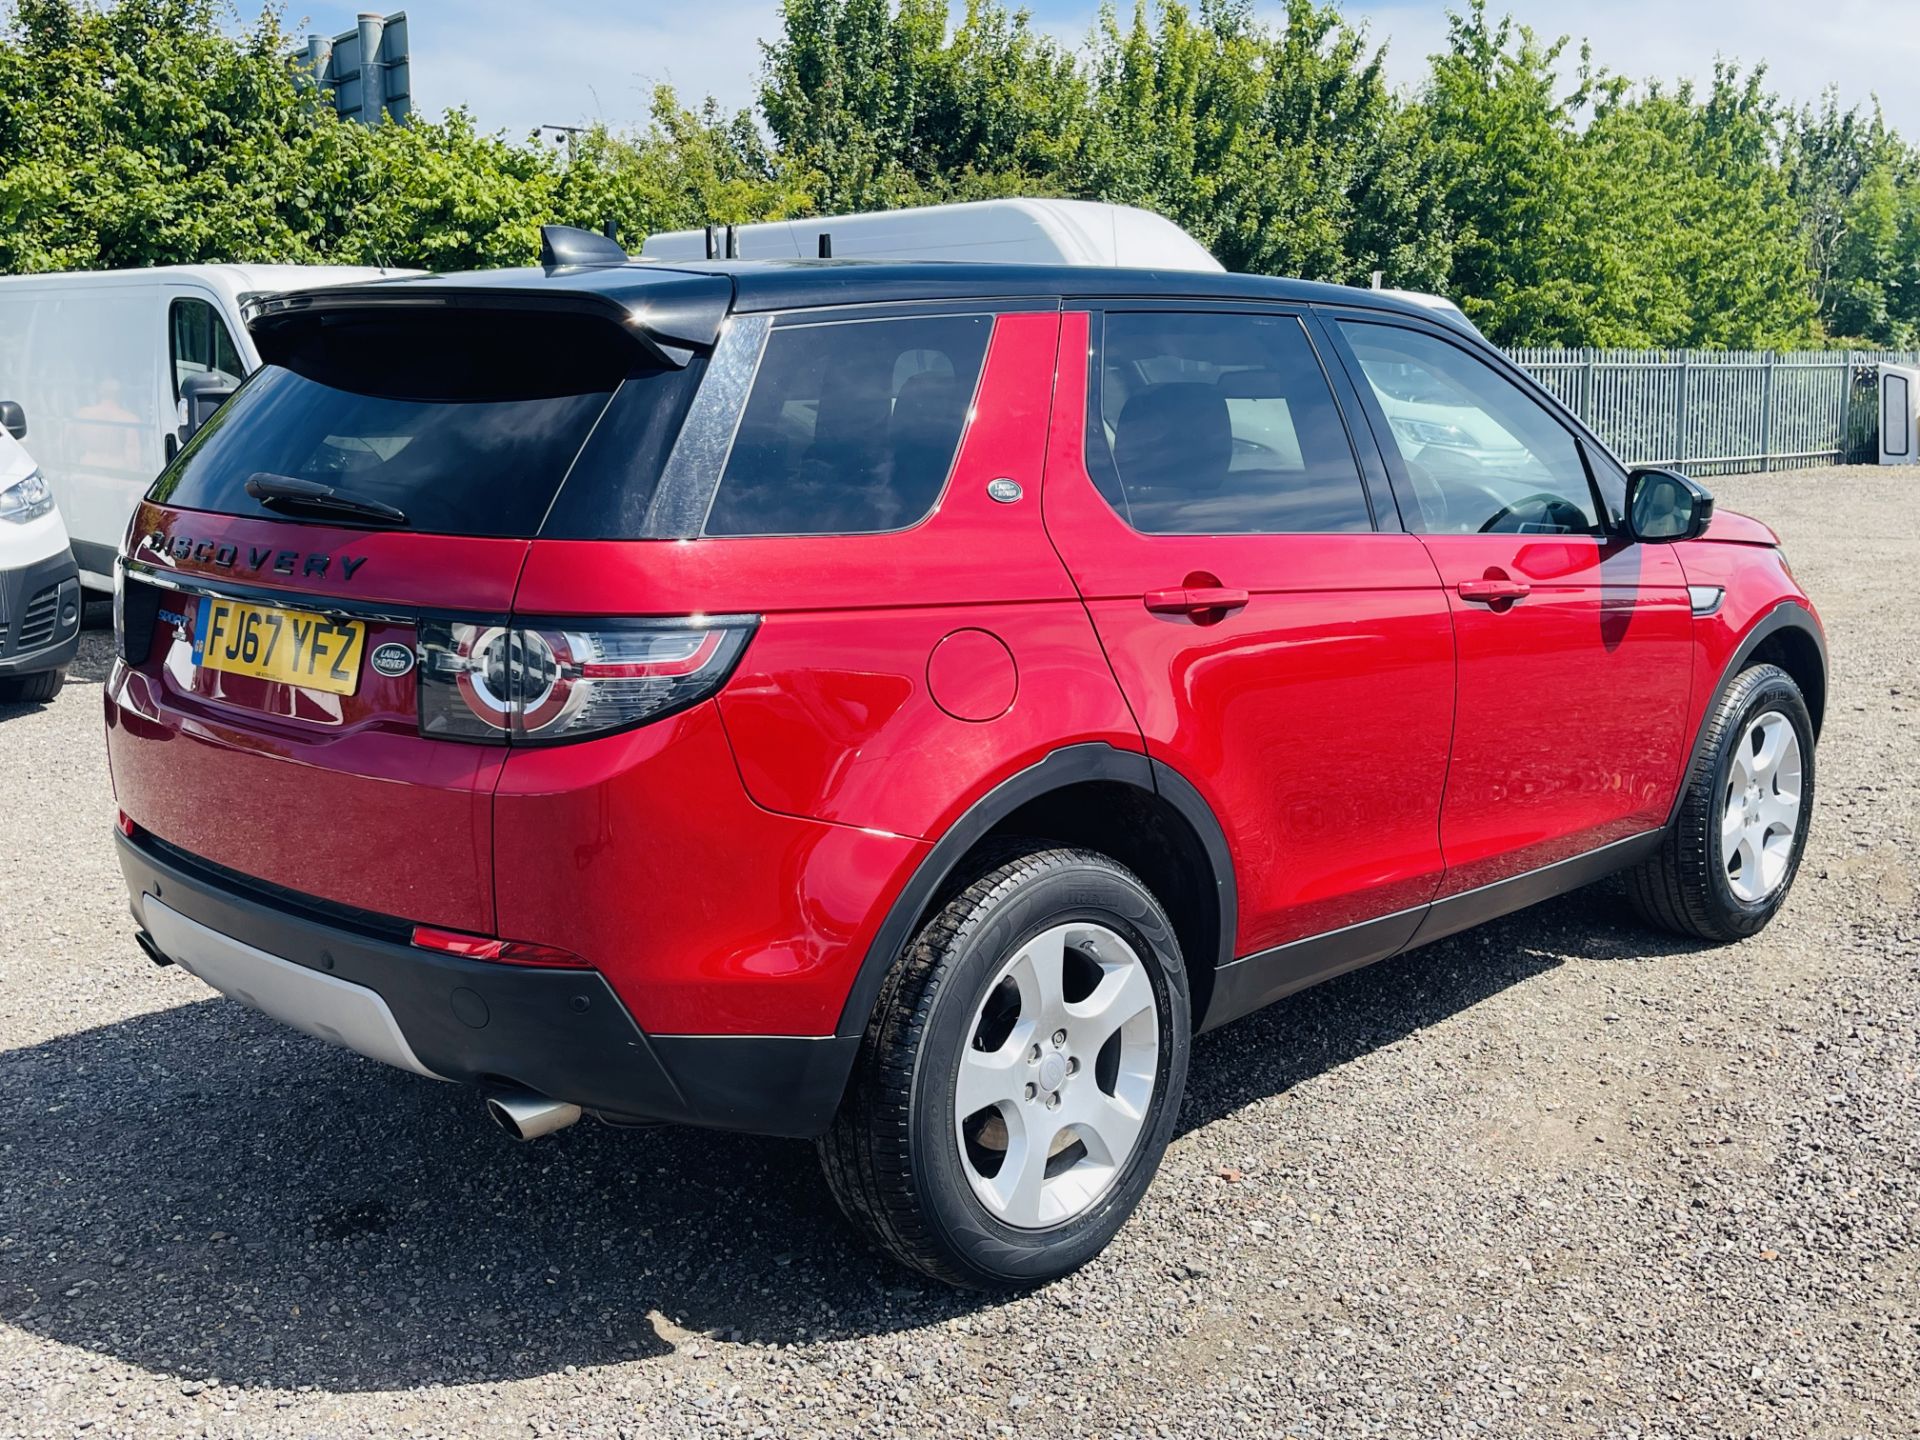 Land Rover Discovery Sport HSE 2.0 ED4 2017 '67 Reg' Sat Nav - Panoramic Glass Roof - ULEZ Compliant - Image 12 of 33